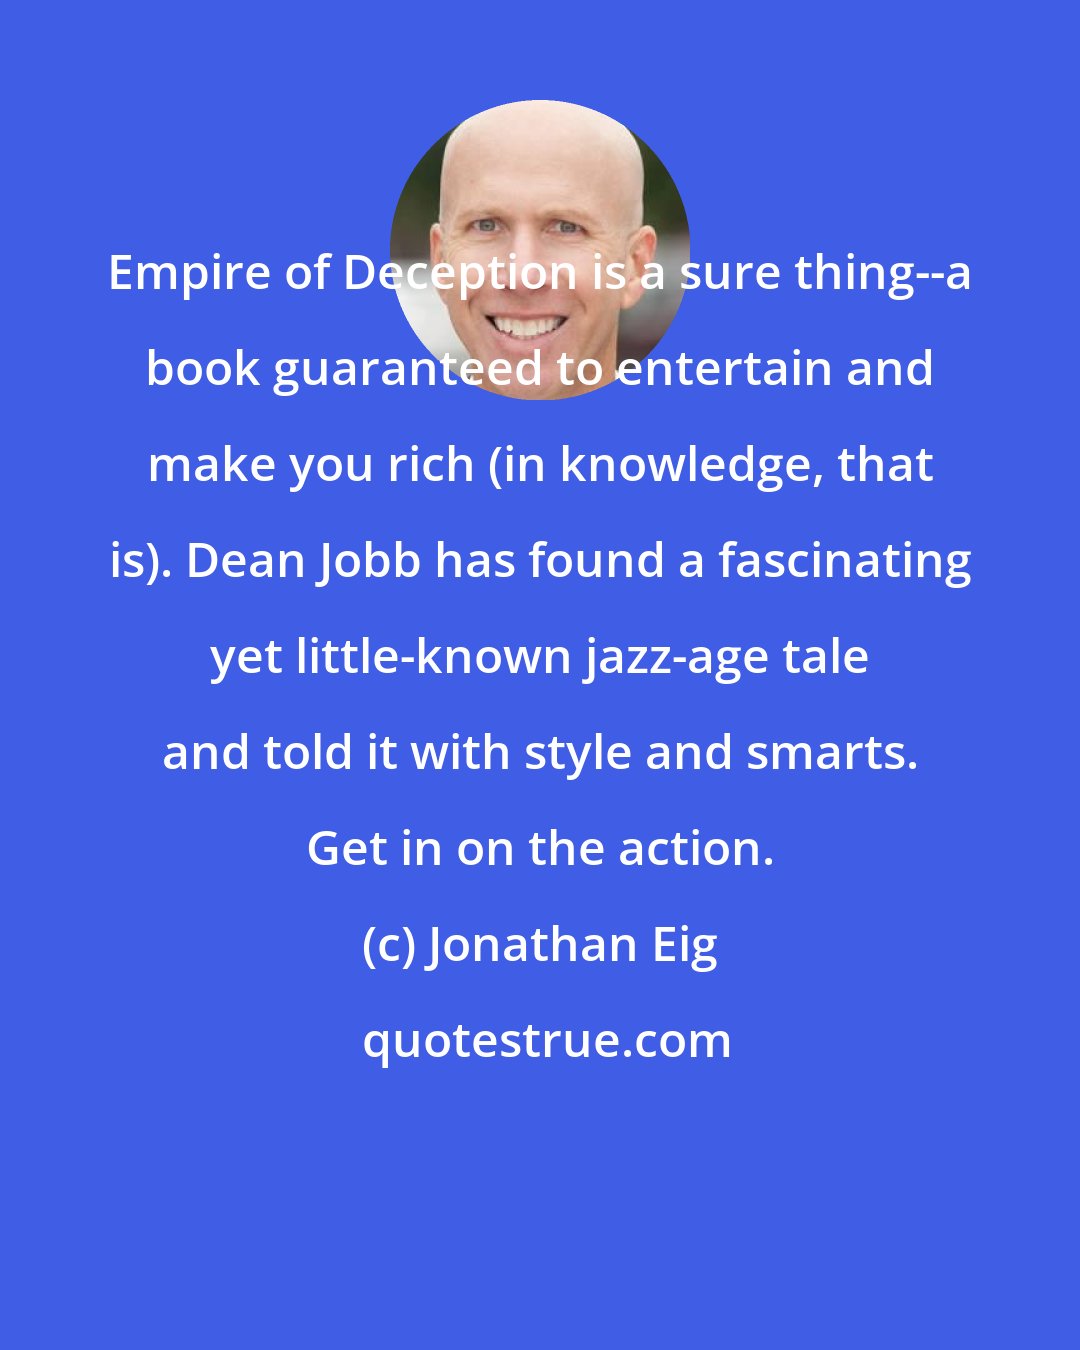 Jonathan Eig: Empire of Deception is a sure thing--a book guaranteed to entertain and make you rich (in knowledge, that is). Dean Jobb has found a fascinating yet little-known jazz-age tale and told it with style and smarts. Get in on the action.